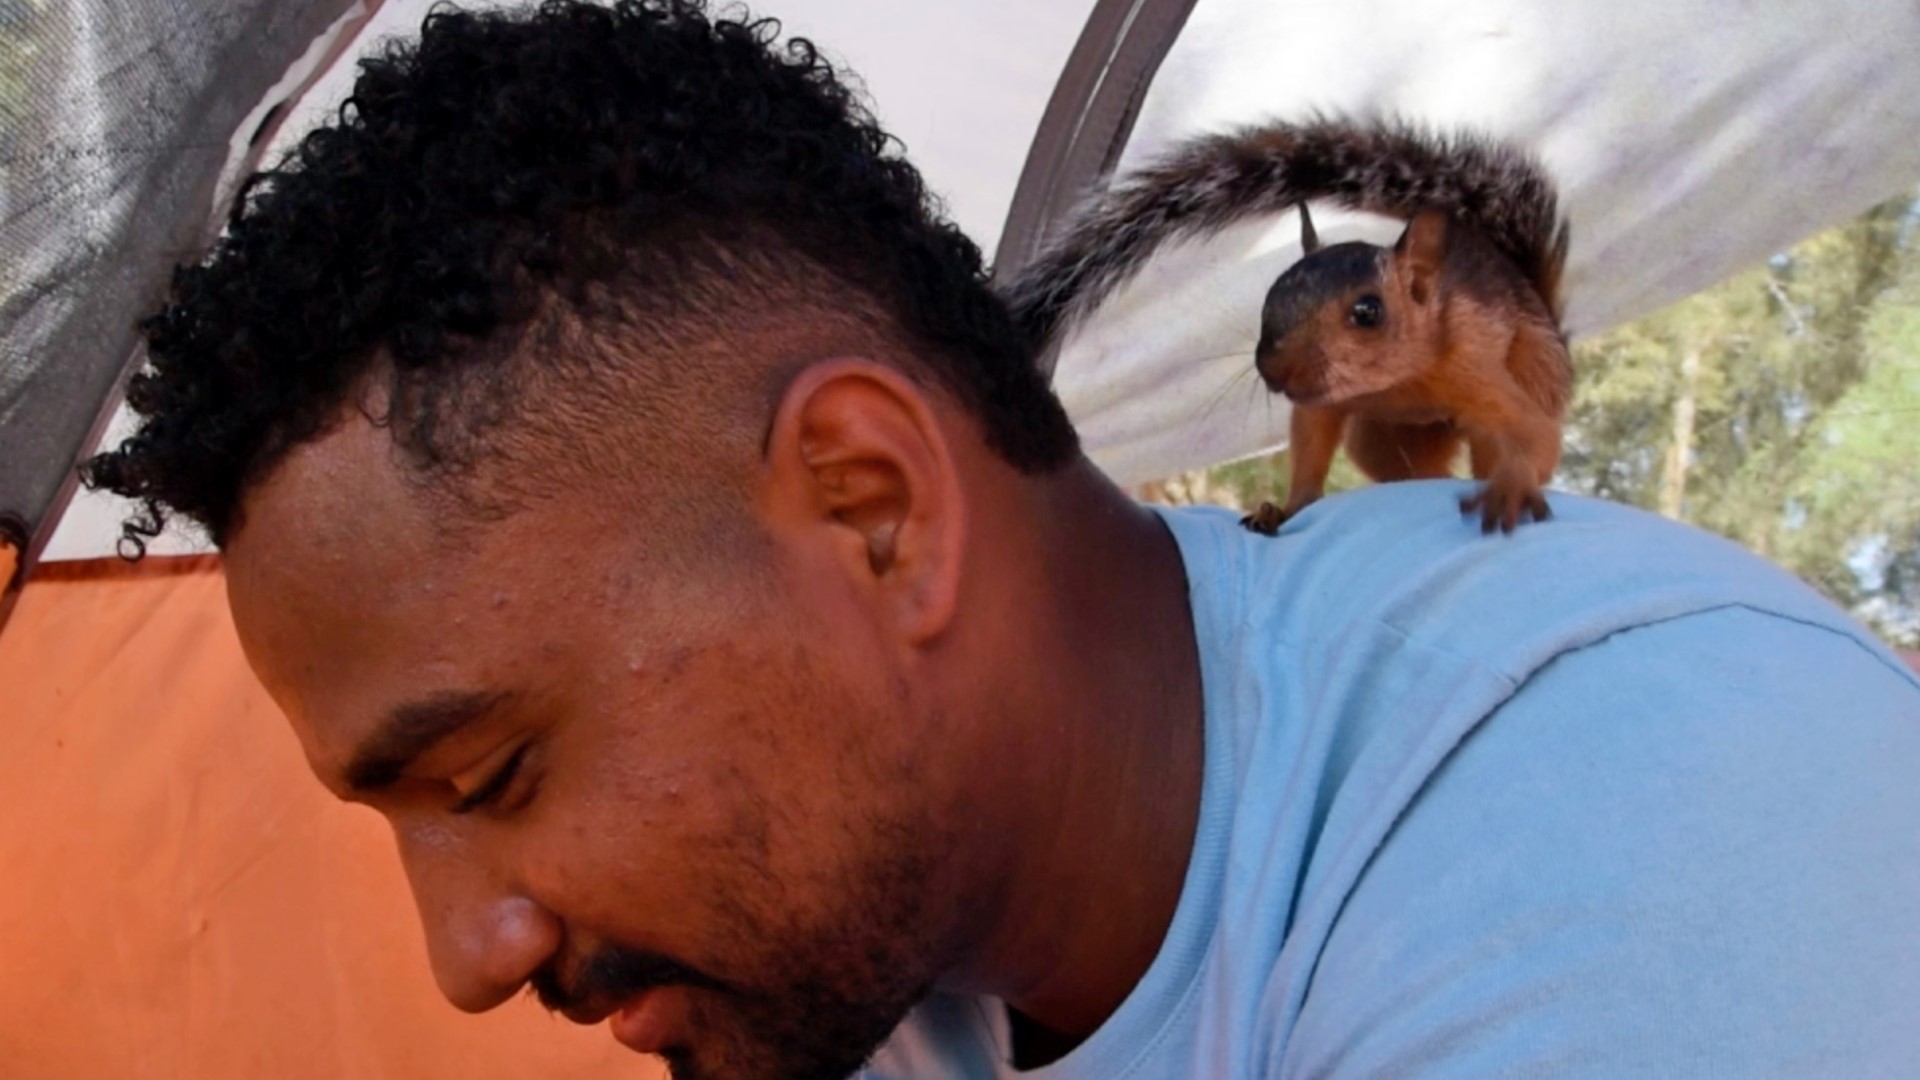 A 23-year-old Venezuela man is preparing to say goodbye to a pet squirrel he says he brought from his home country on a journey to Mexico.